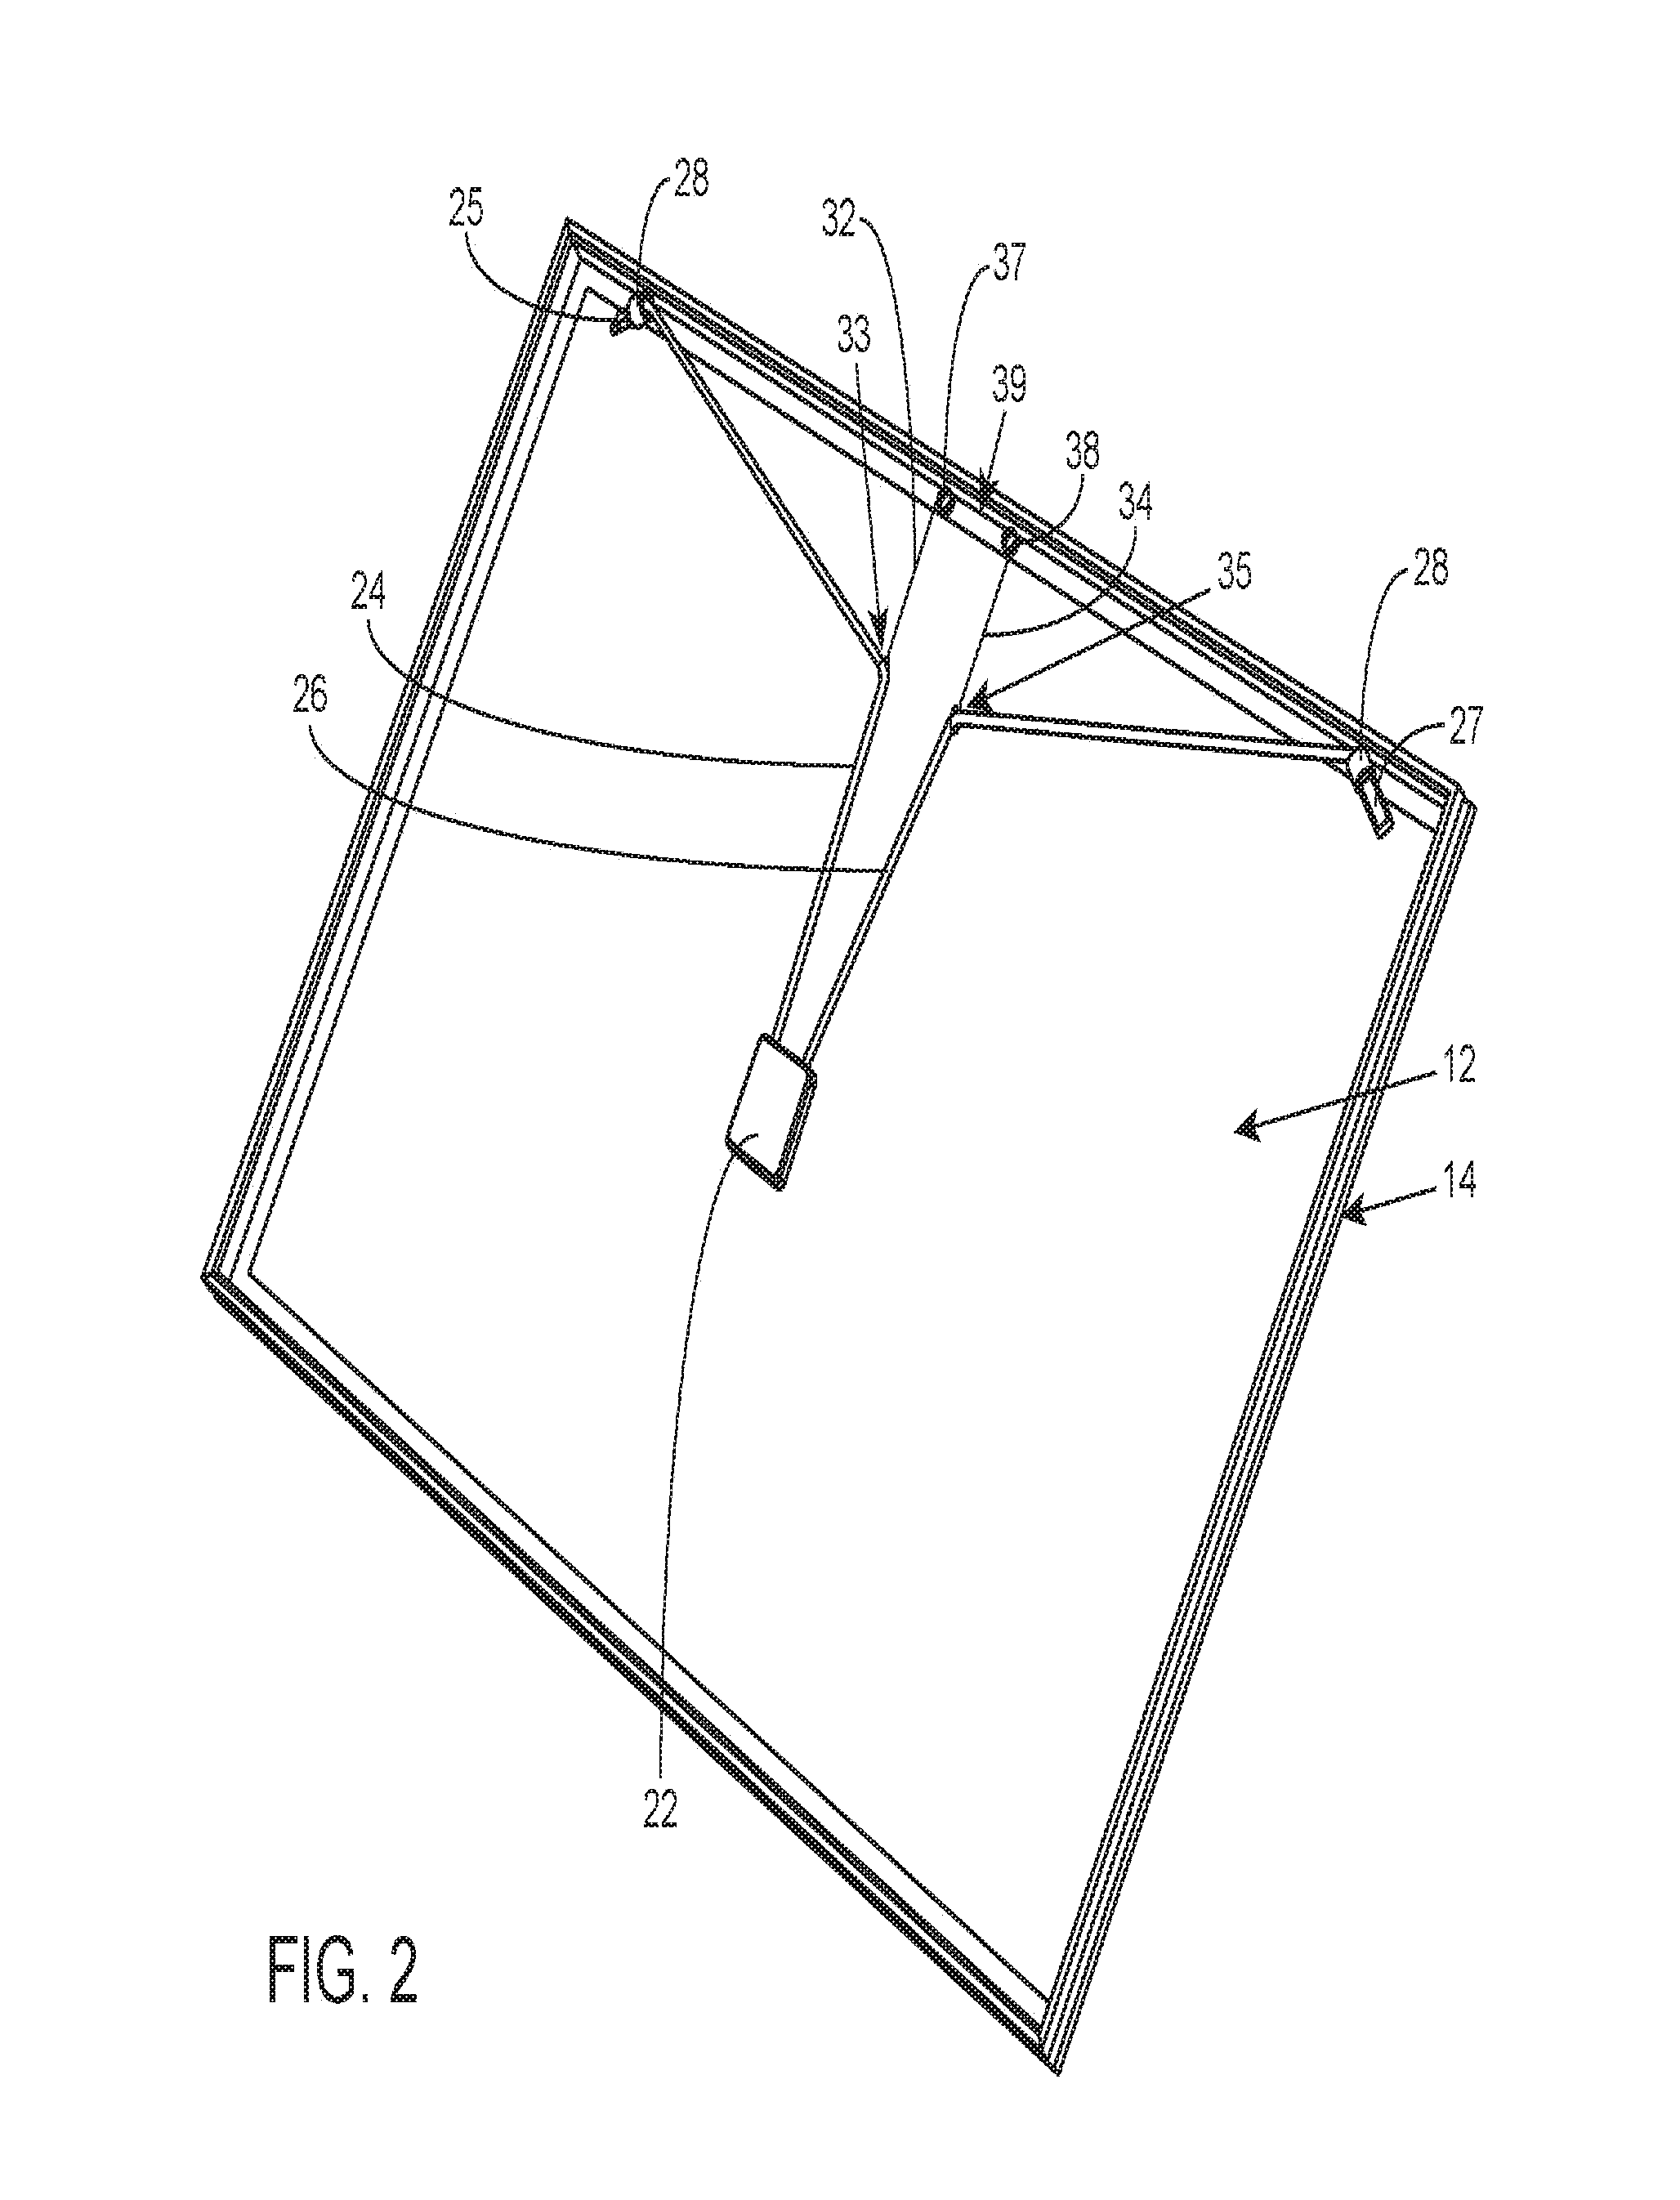 Retractable wiring system for a photovoltaic module